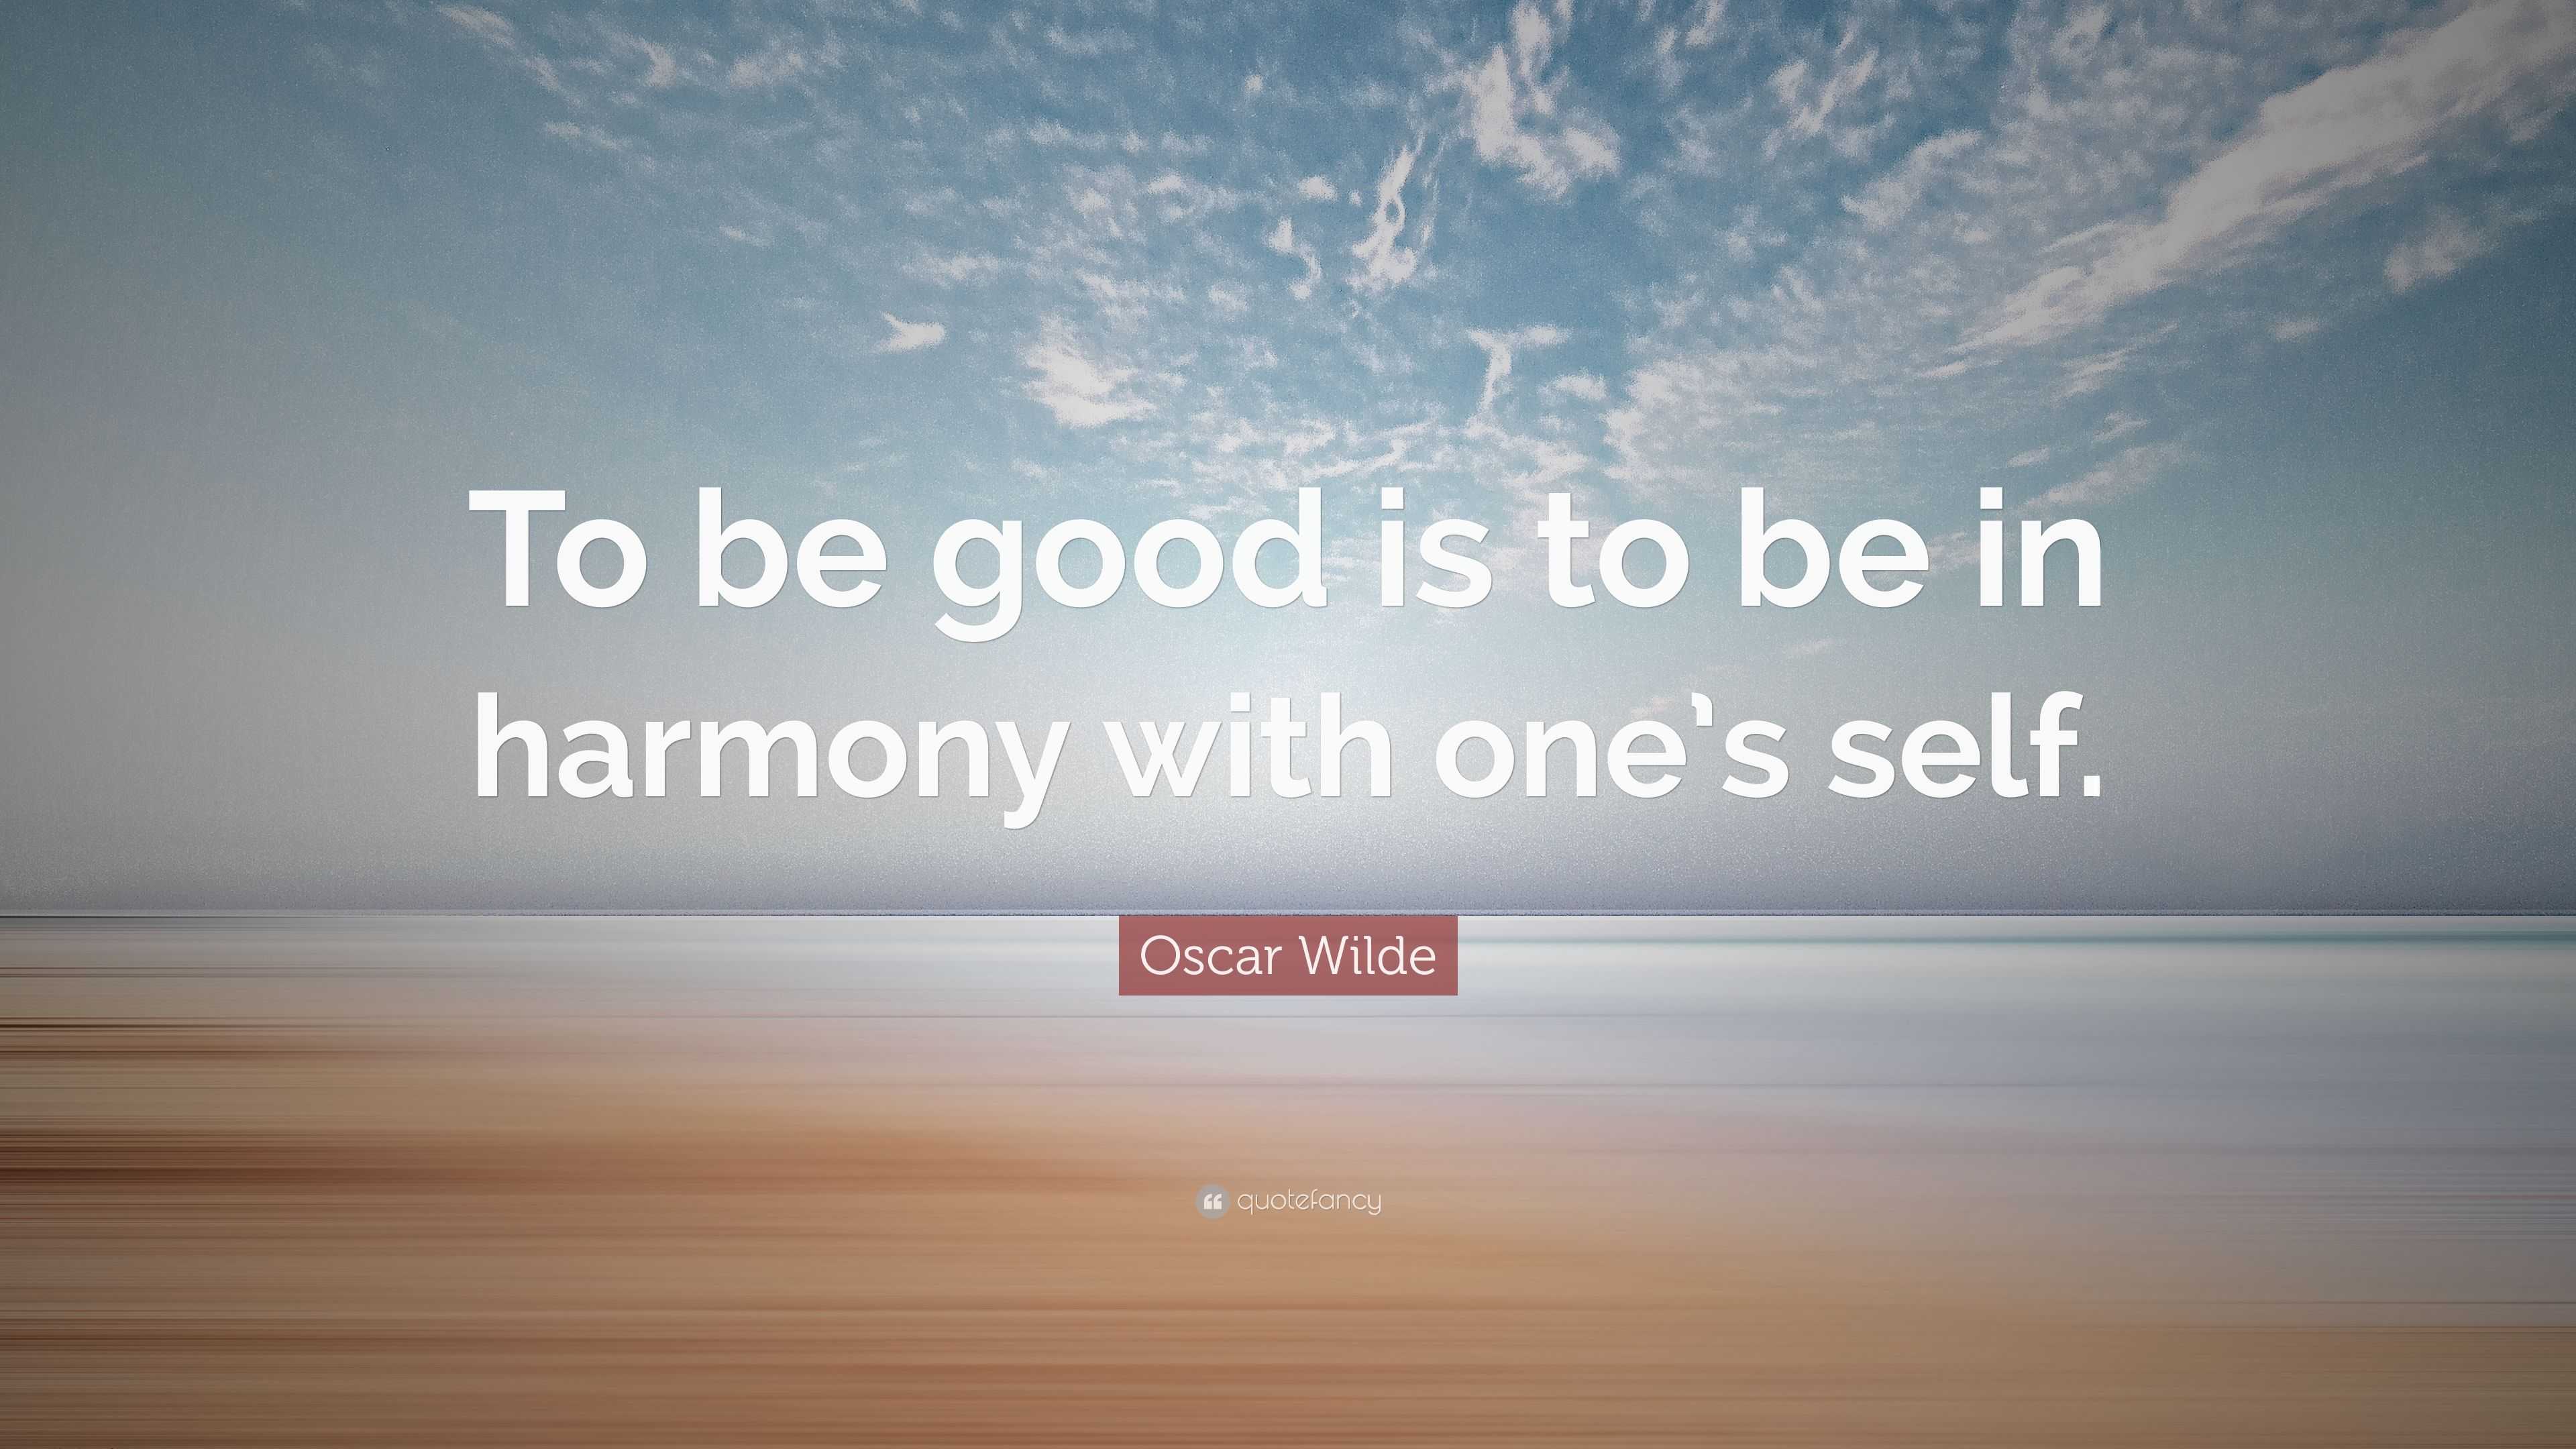 Oscar Wilde Quote: “To be good is to be in harmony with one’s self.”